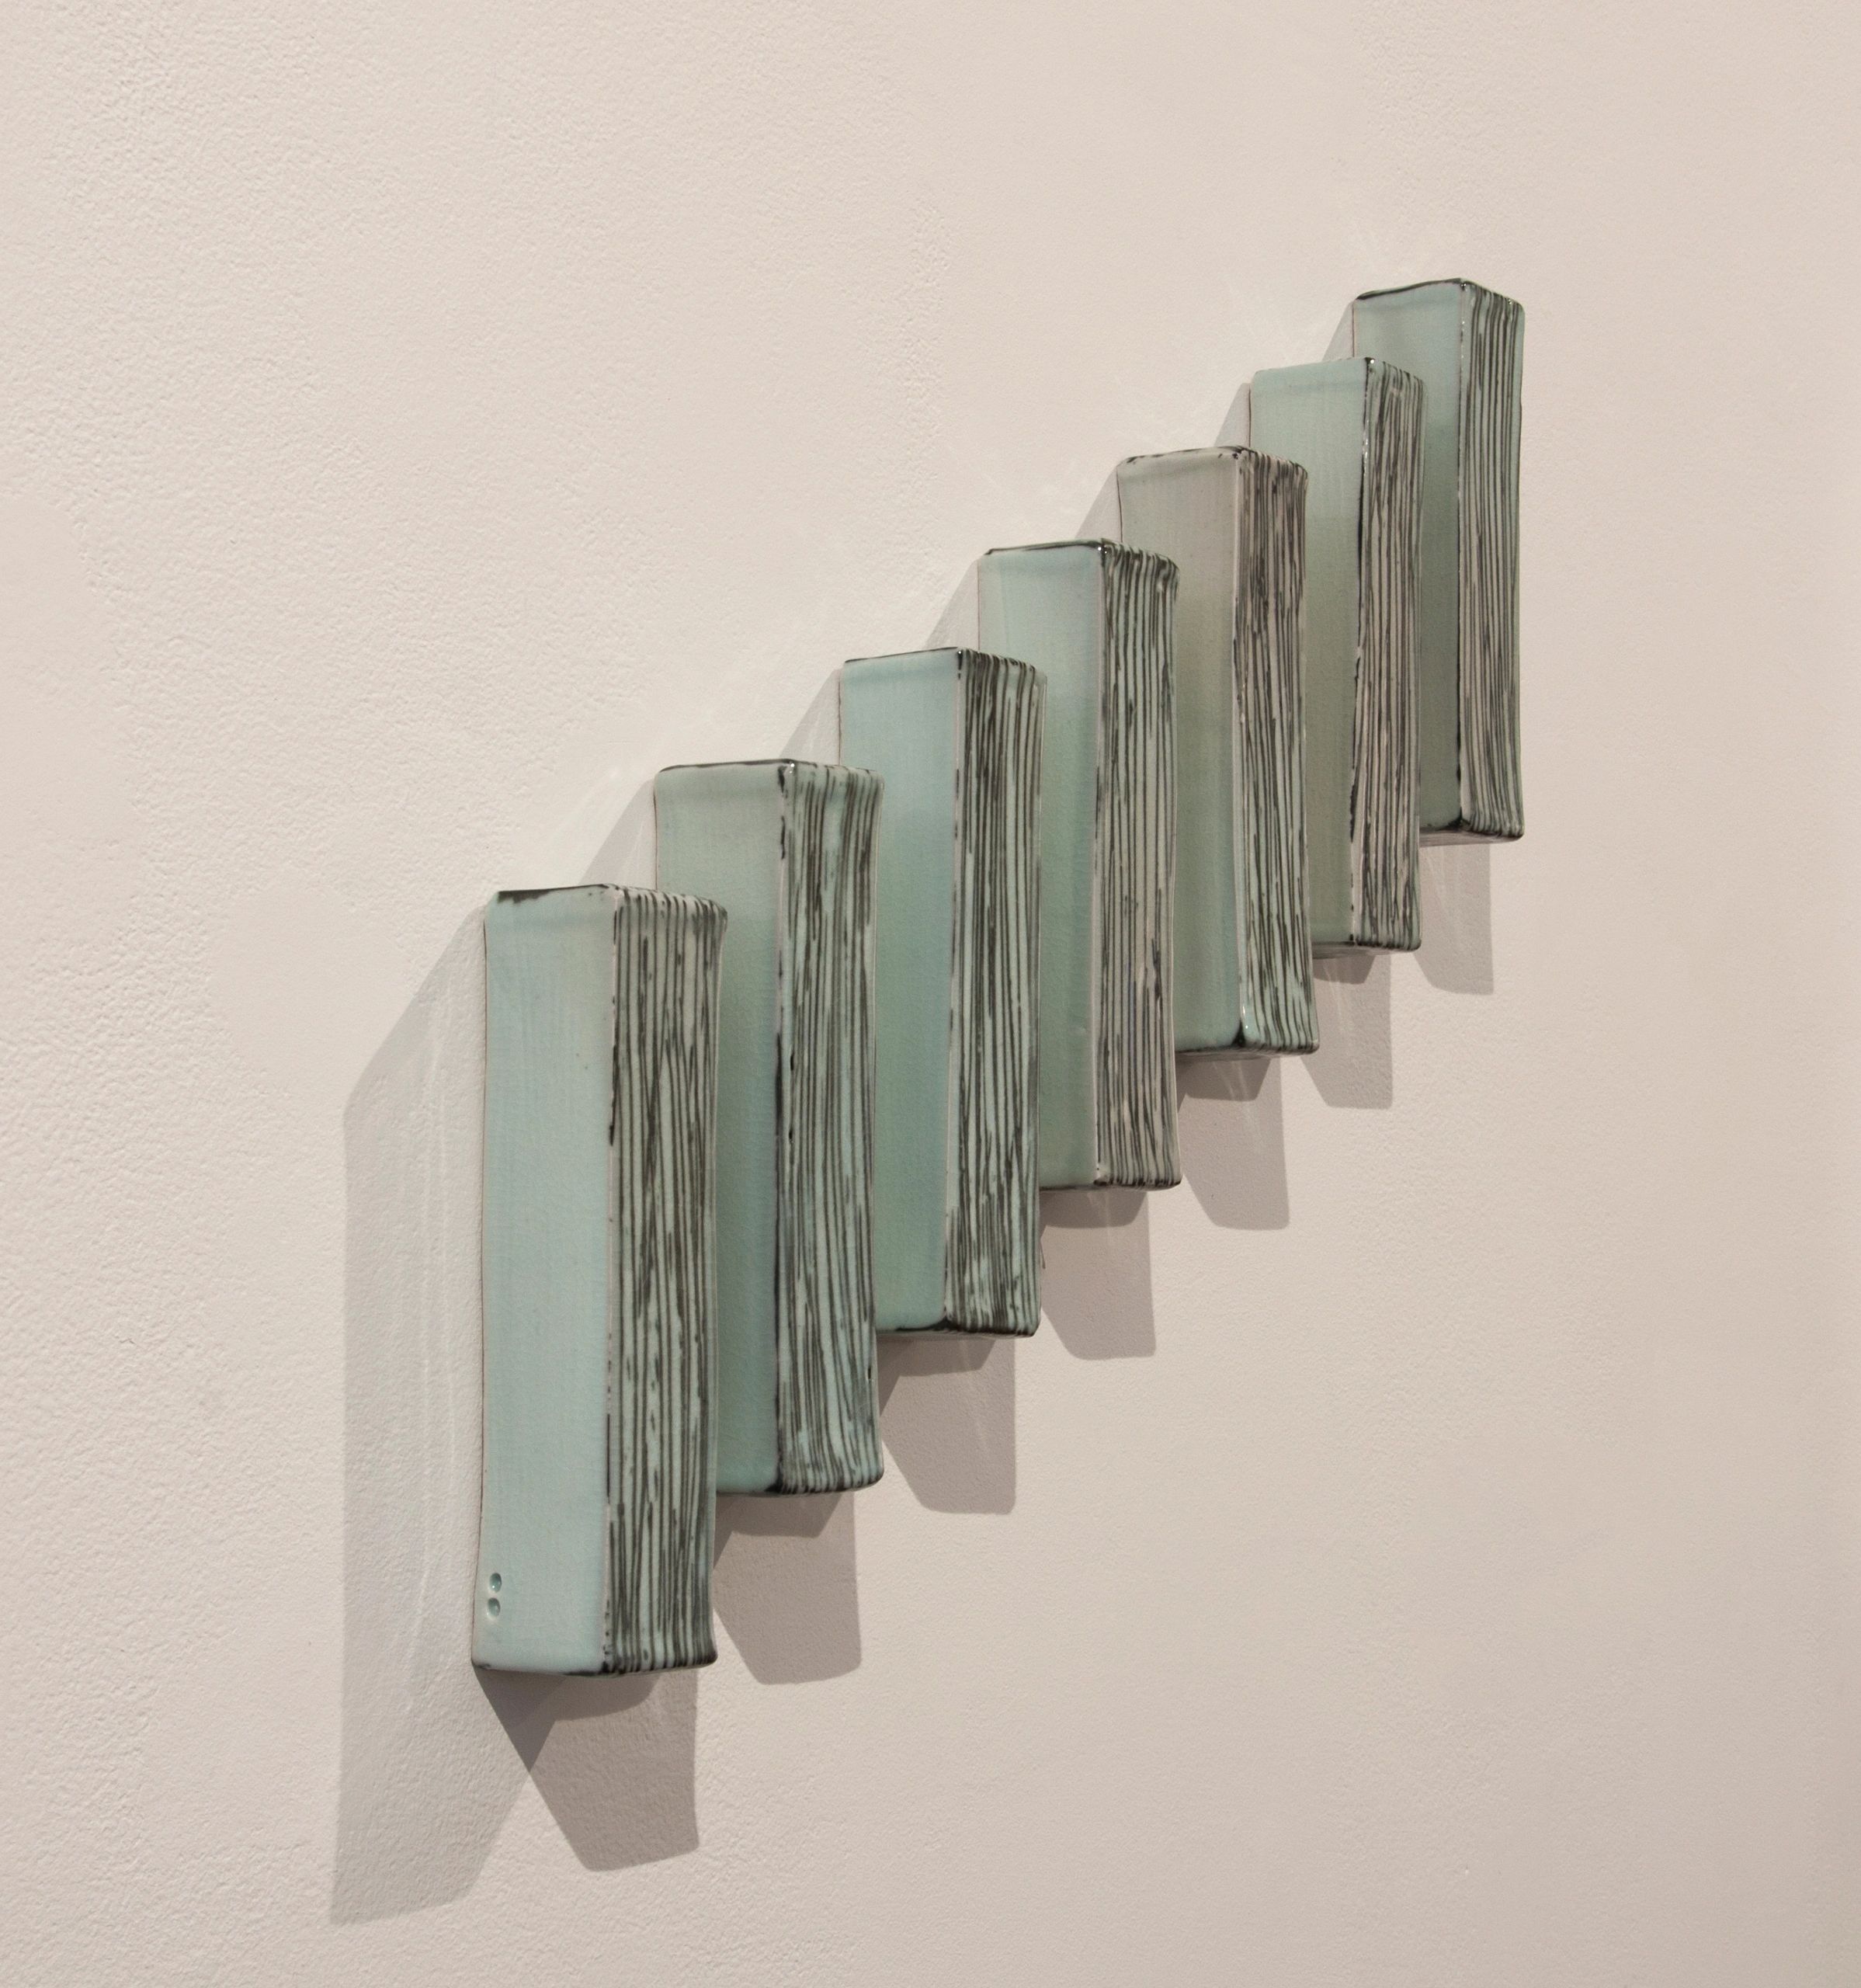 Seven porcelain rectangular forms installed on the wall using the shadows as part of the composition